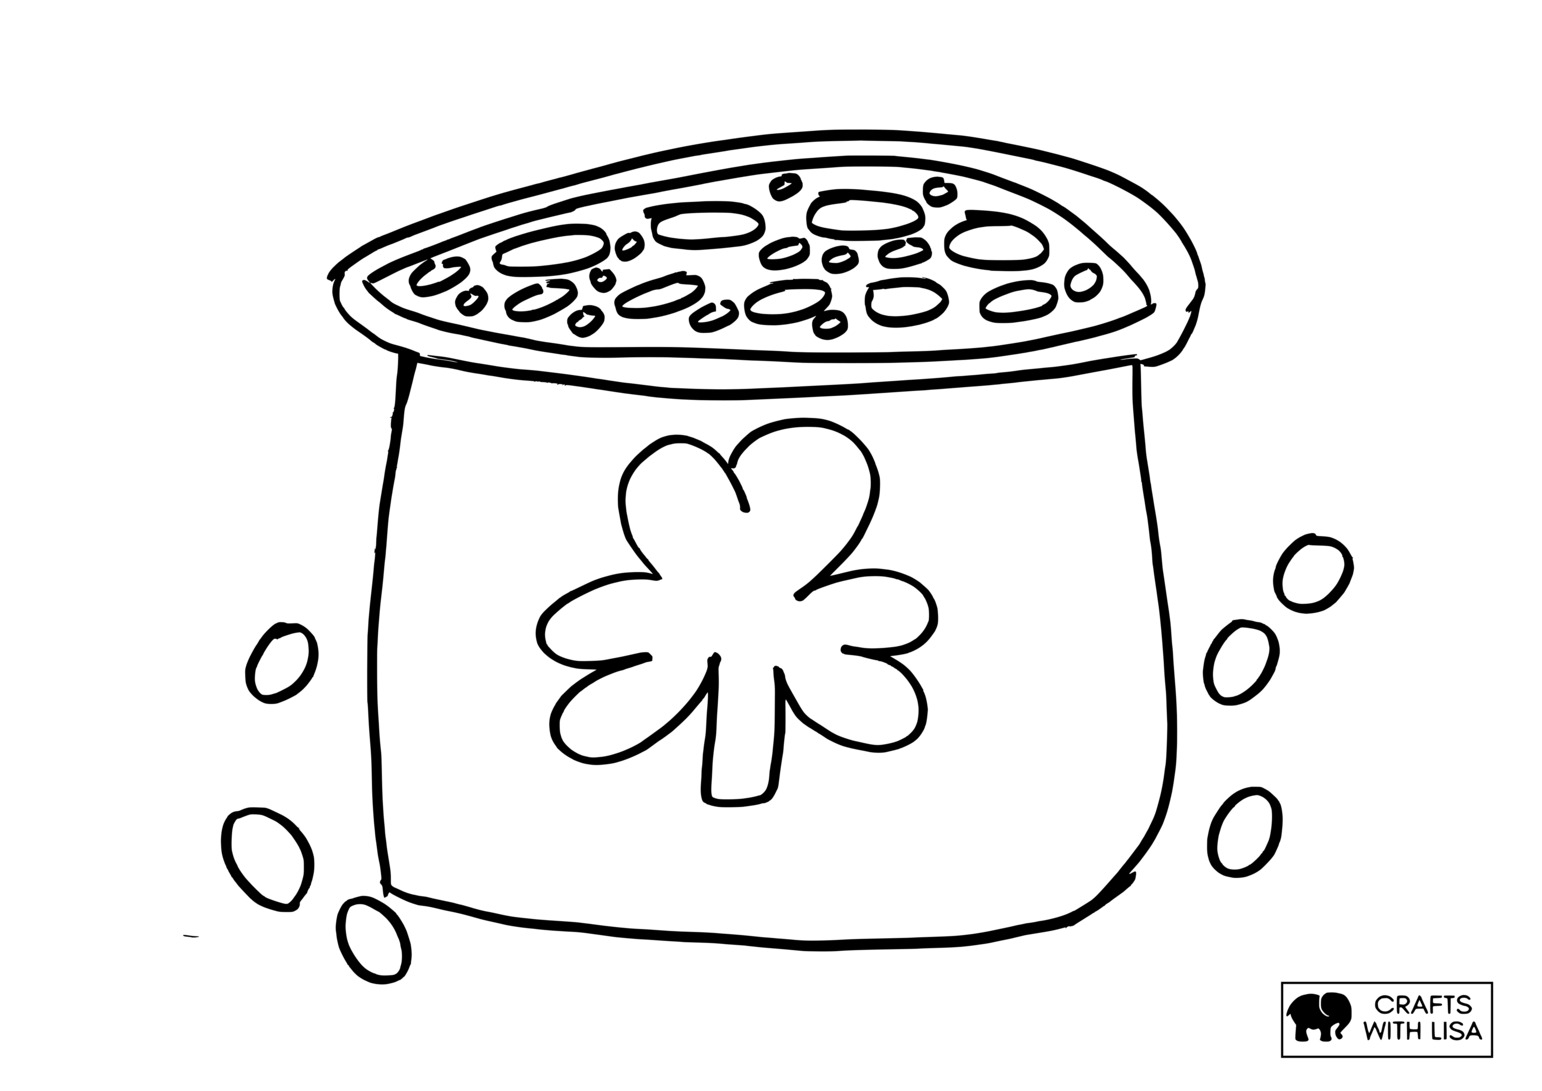 St patricks day pot of gold coloring page